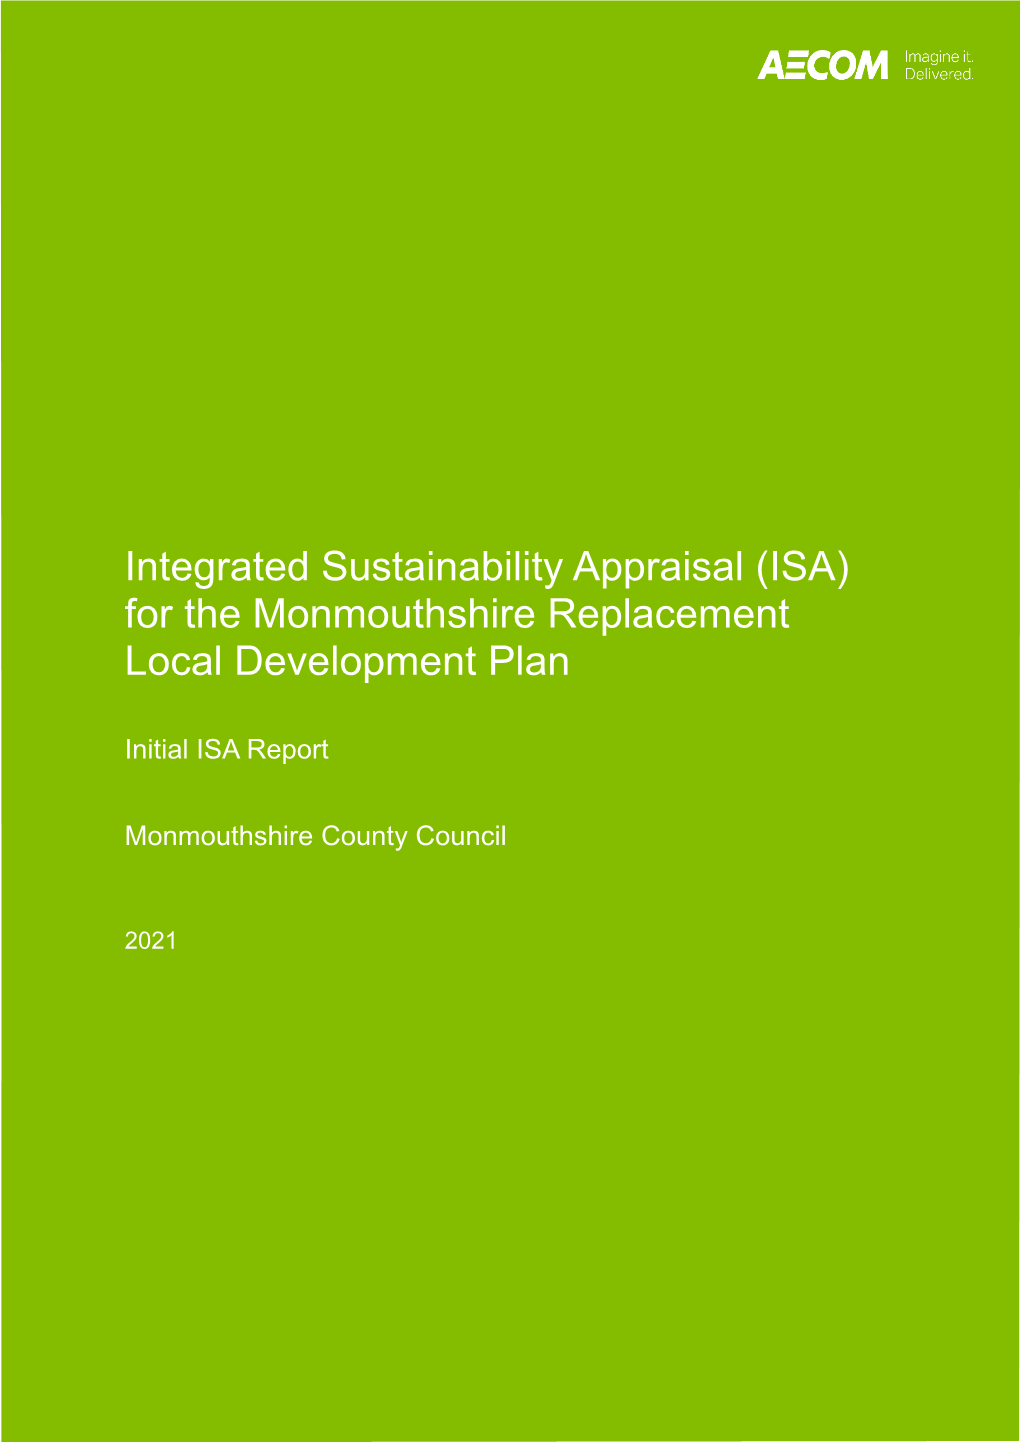 Initial Integrated Sustainability Appraisal (ISA)